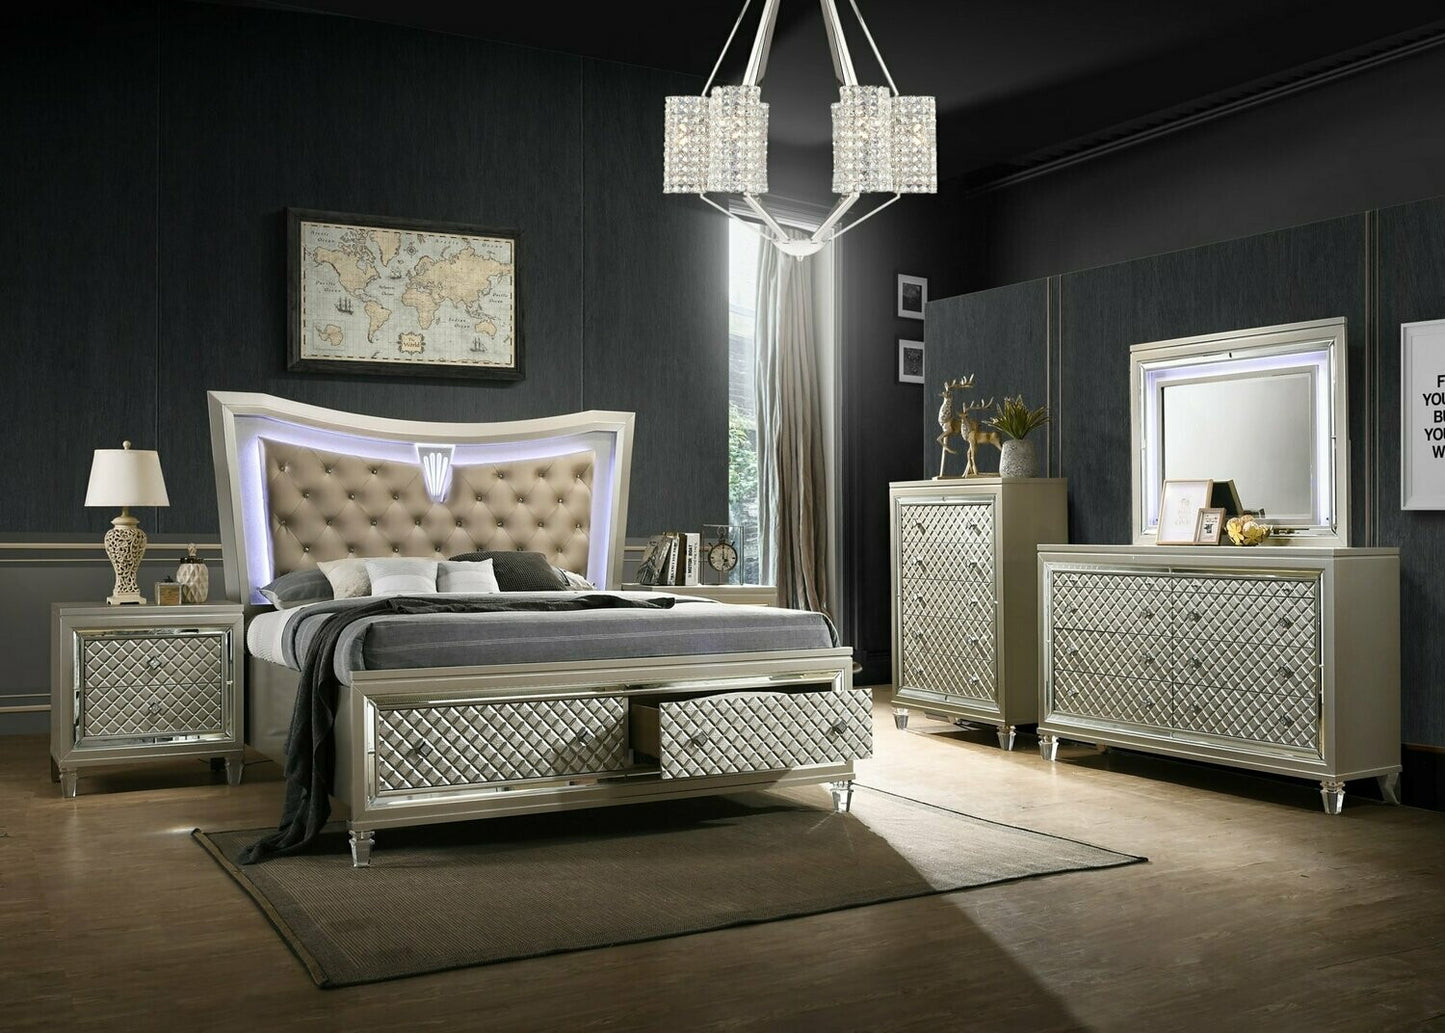 Venetian 3 Pc Bedroom Collection - Champagne Finish